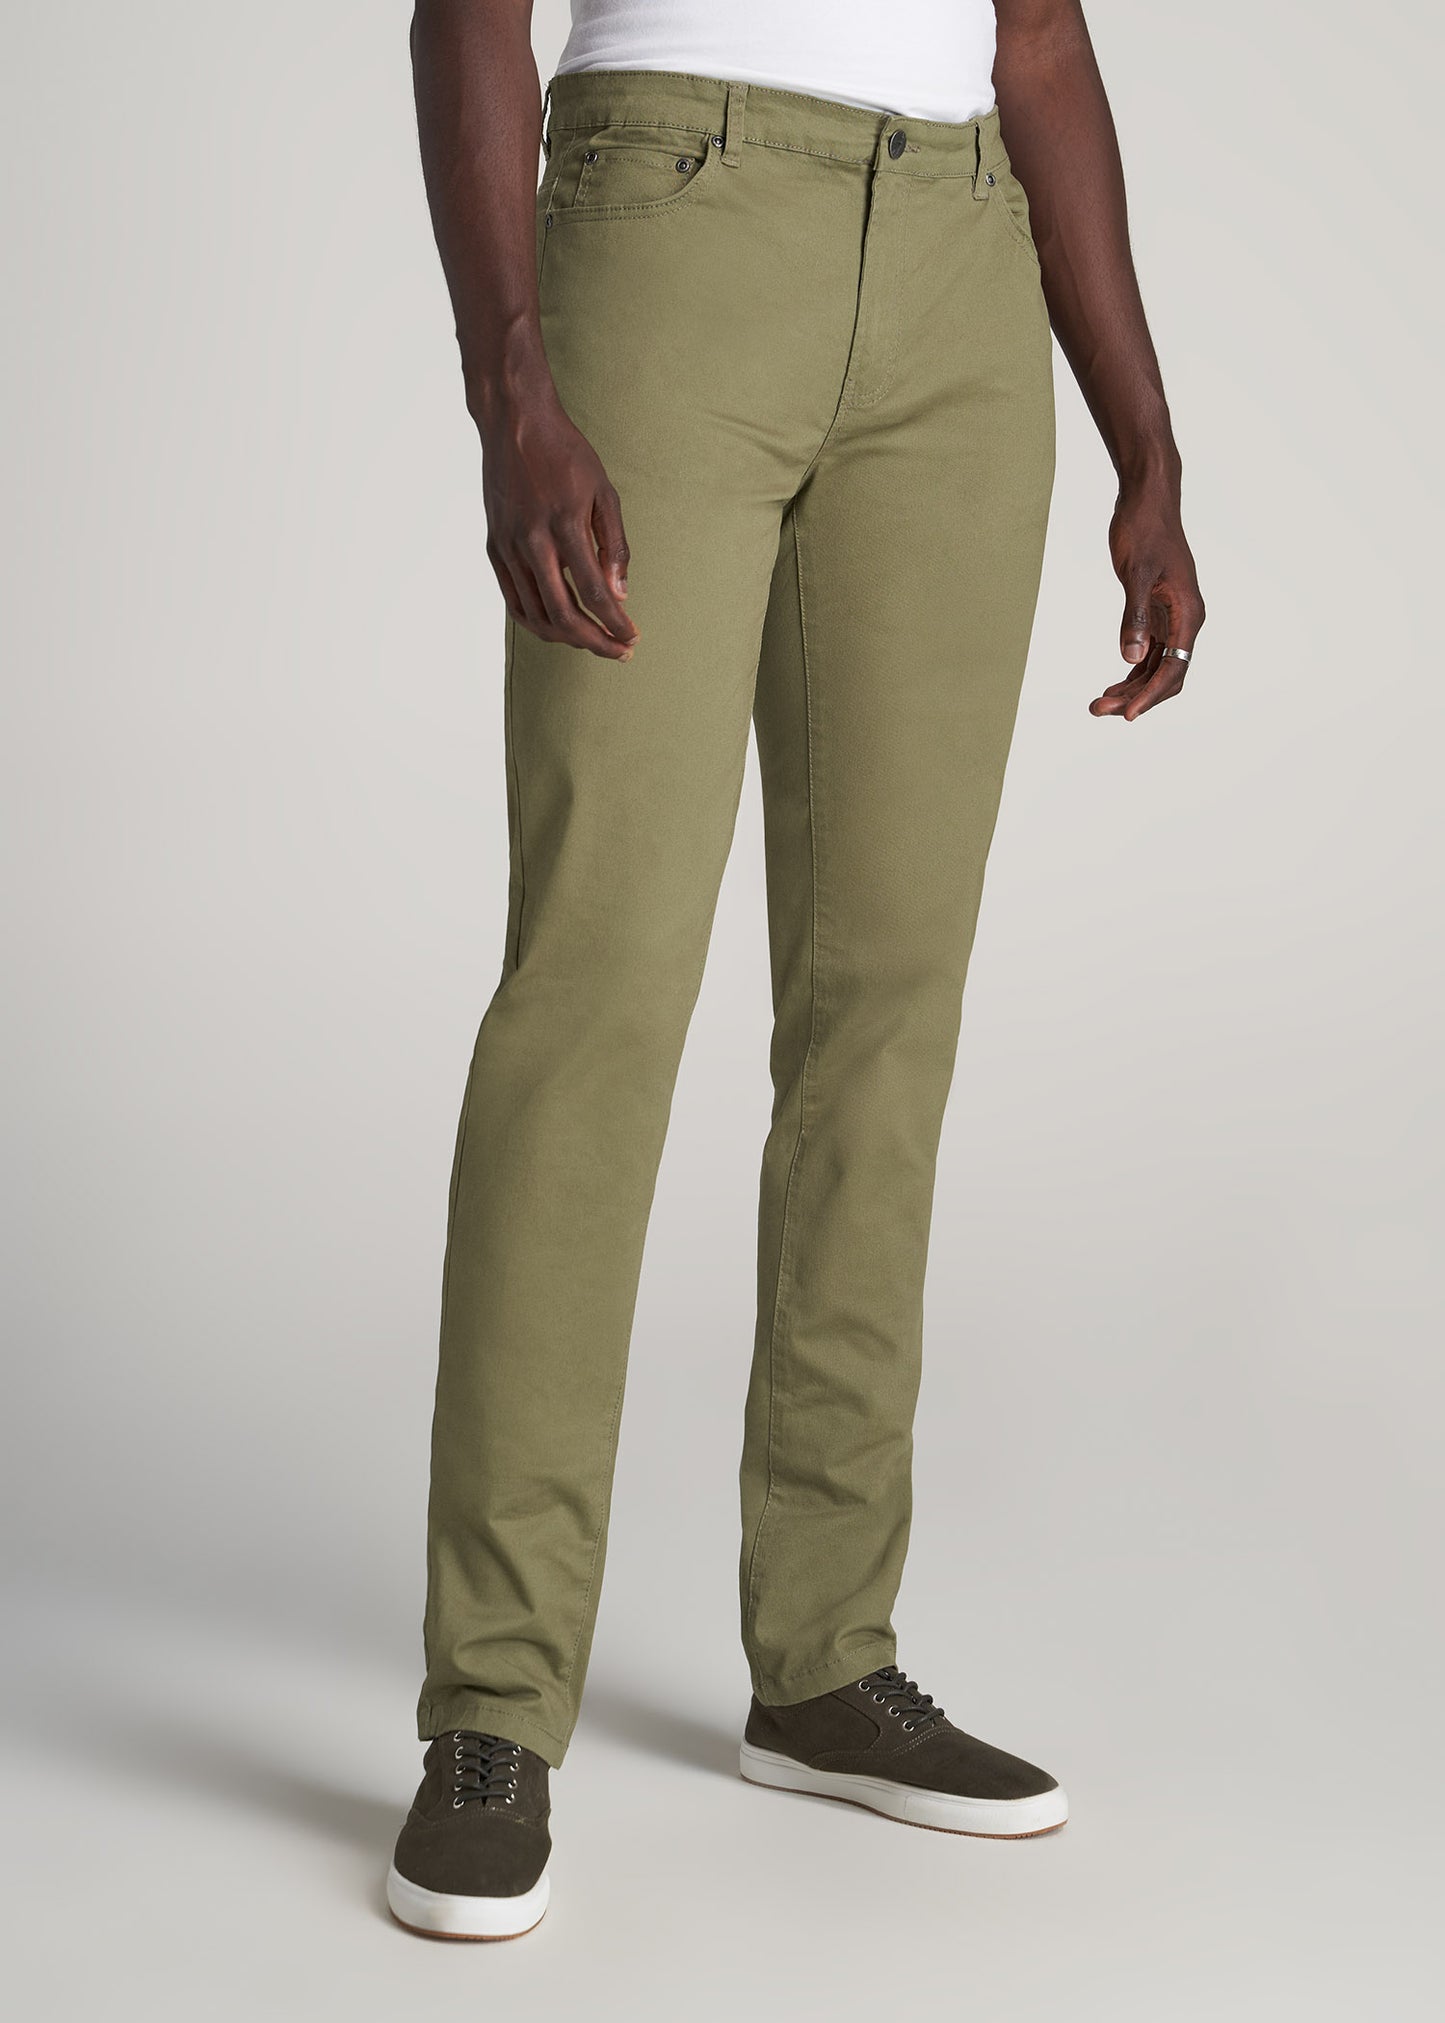       American-Tall-Men-Dylan-5-Pocket-Chino-Fatigue-Green-front